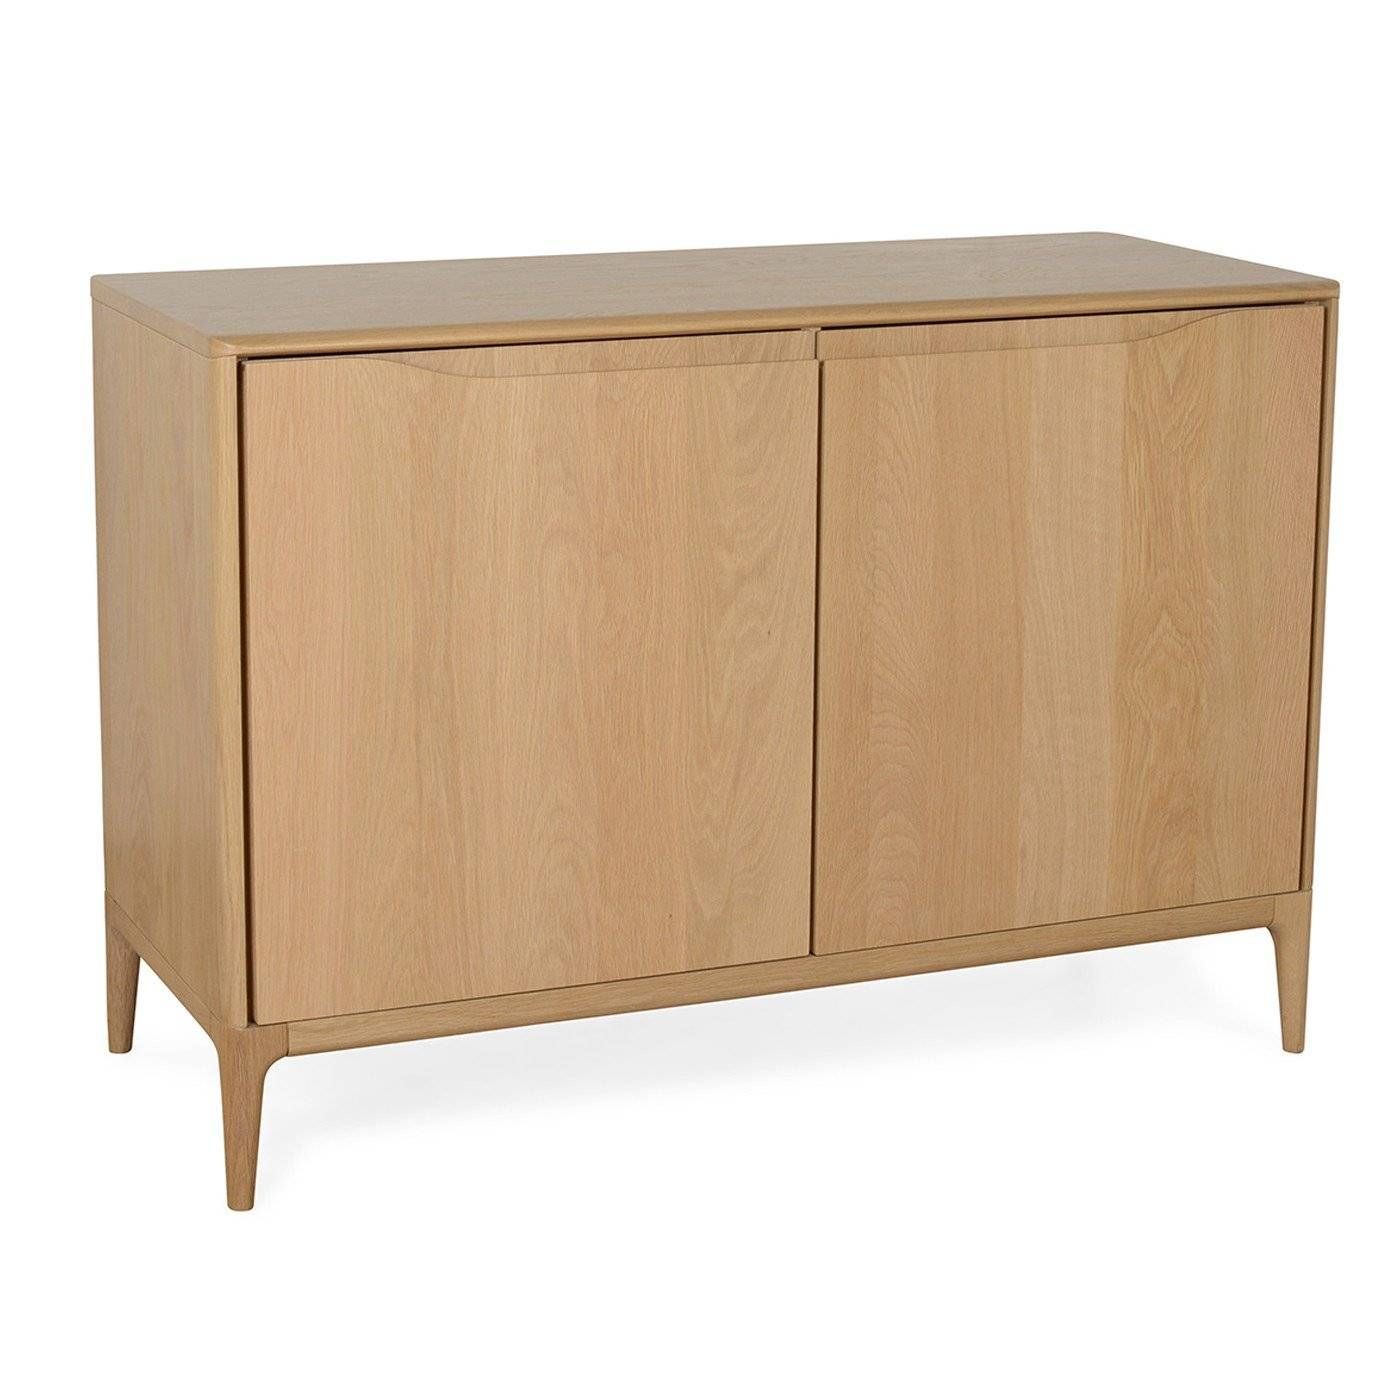 Designer Sideboards | Modern & Contemporary Sideboards | Heal's In Sideboard Small (View 12 of 20)